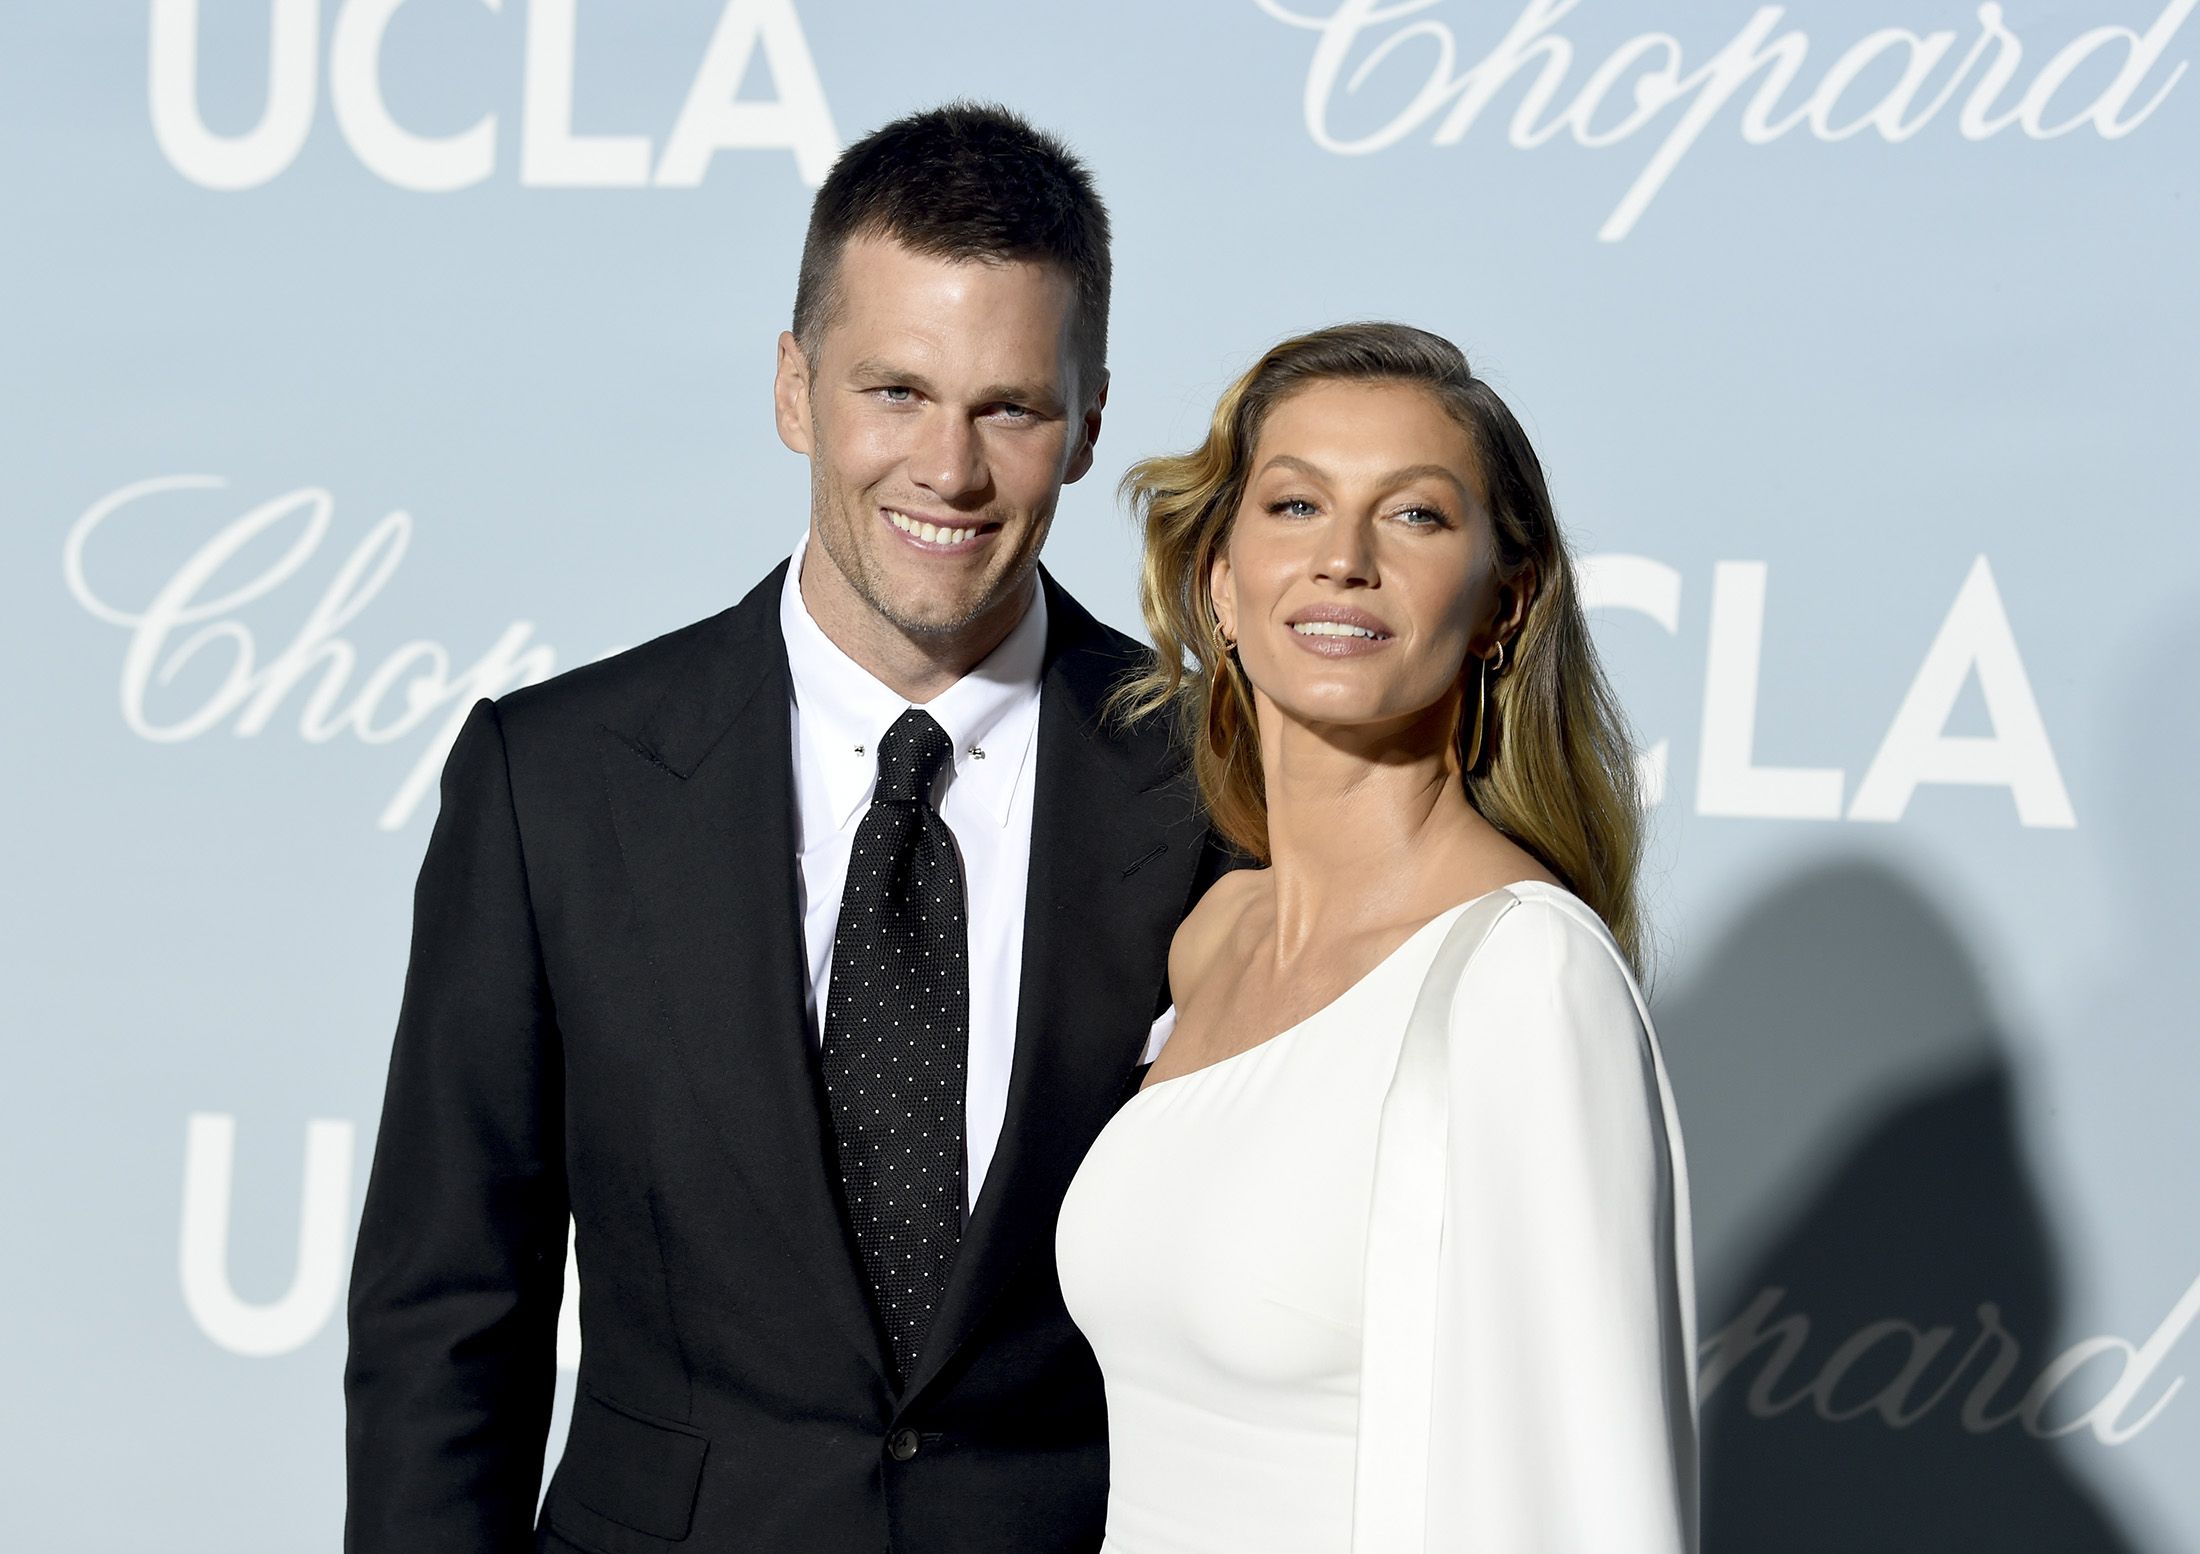 Tom Brady and Gisele Bündchen in 2019 at the Hollywood For Science Gala. (Kevin Winter—Getty Images)